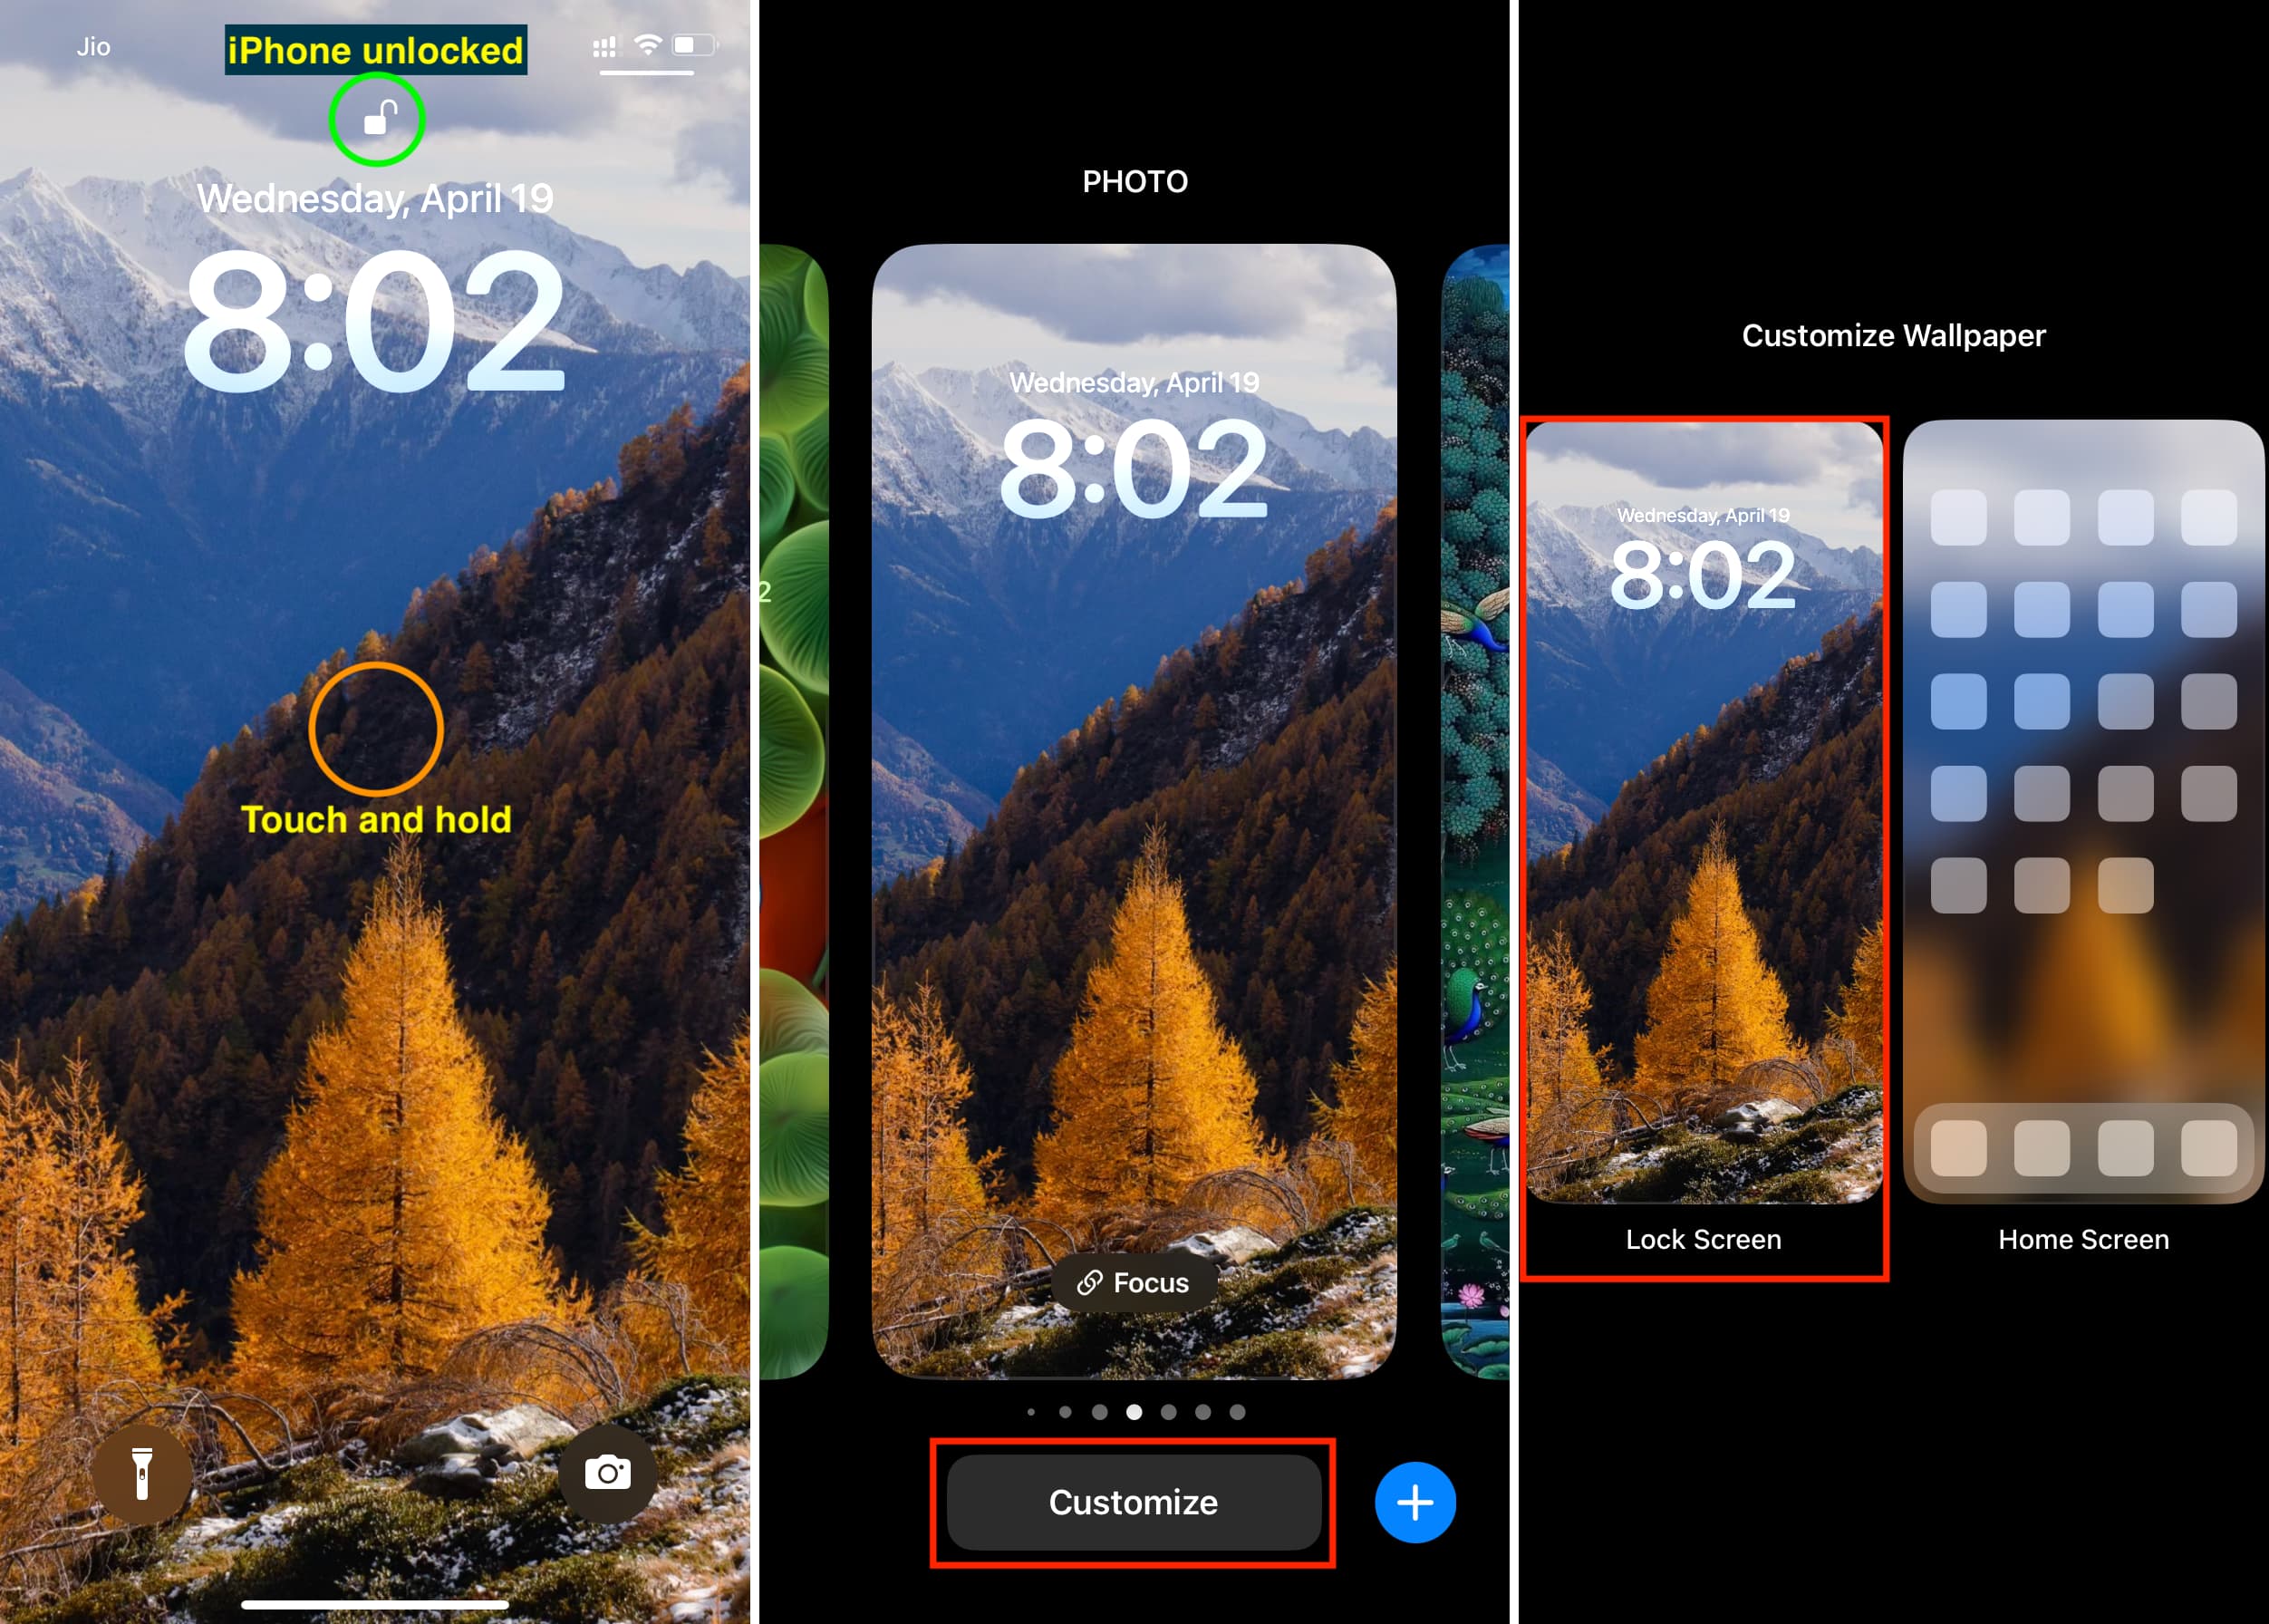 Customize iPhone Lock Screen by adding widgets to it